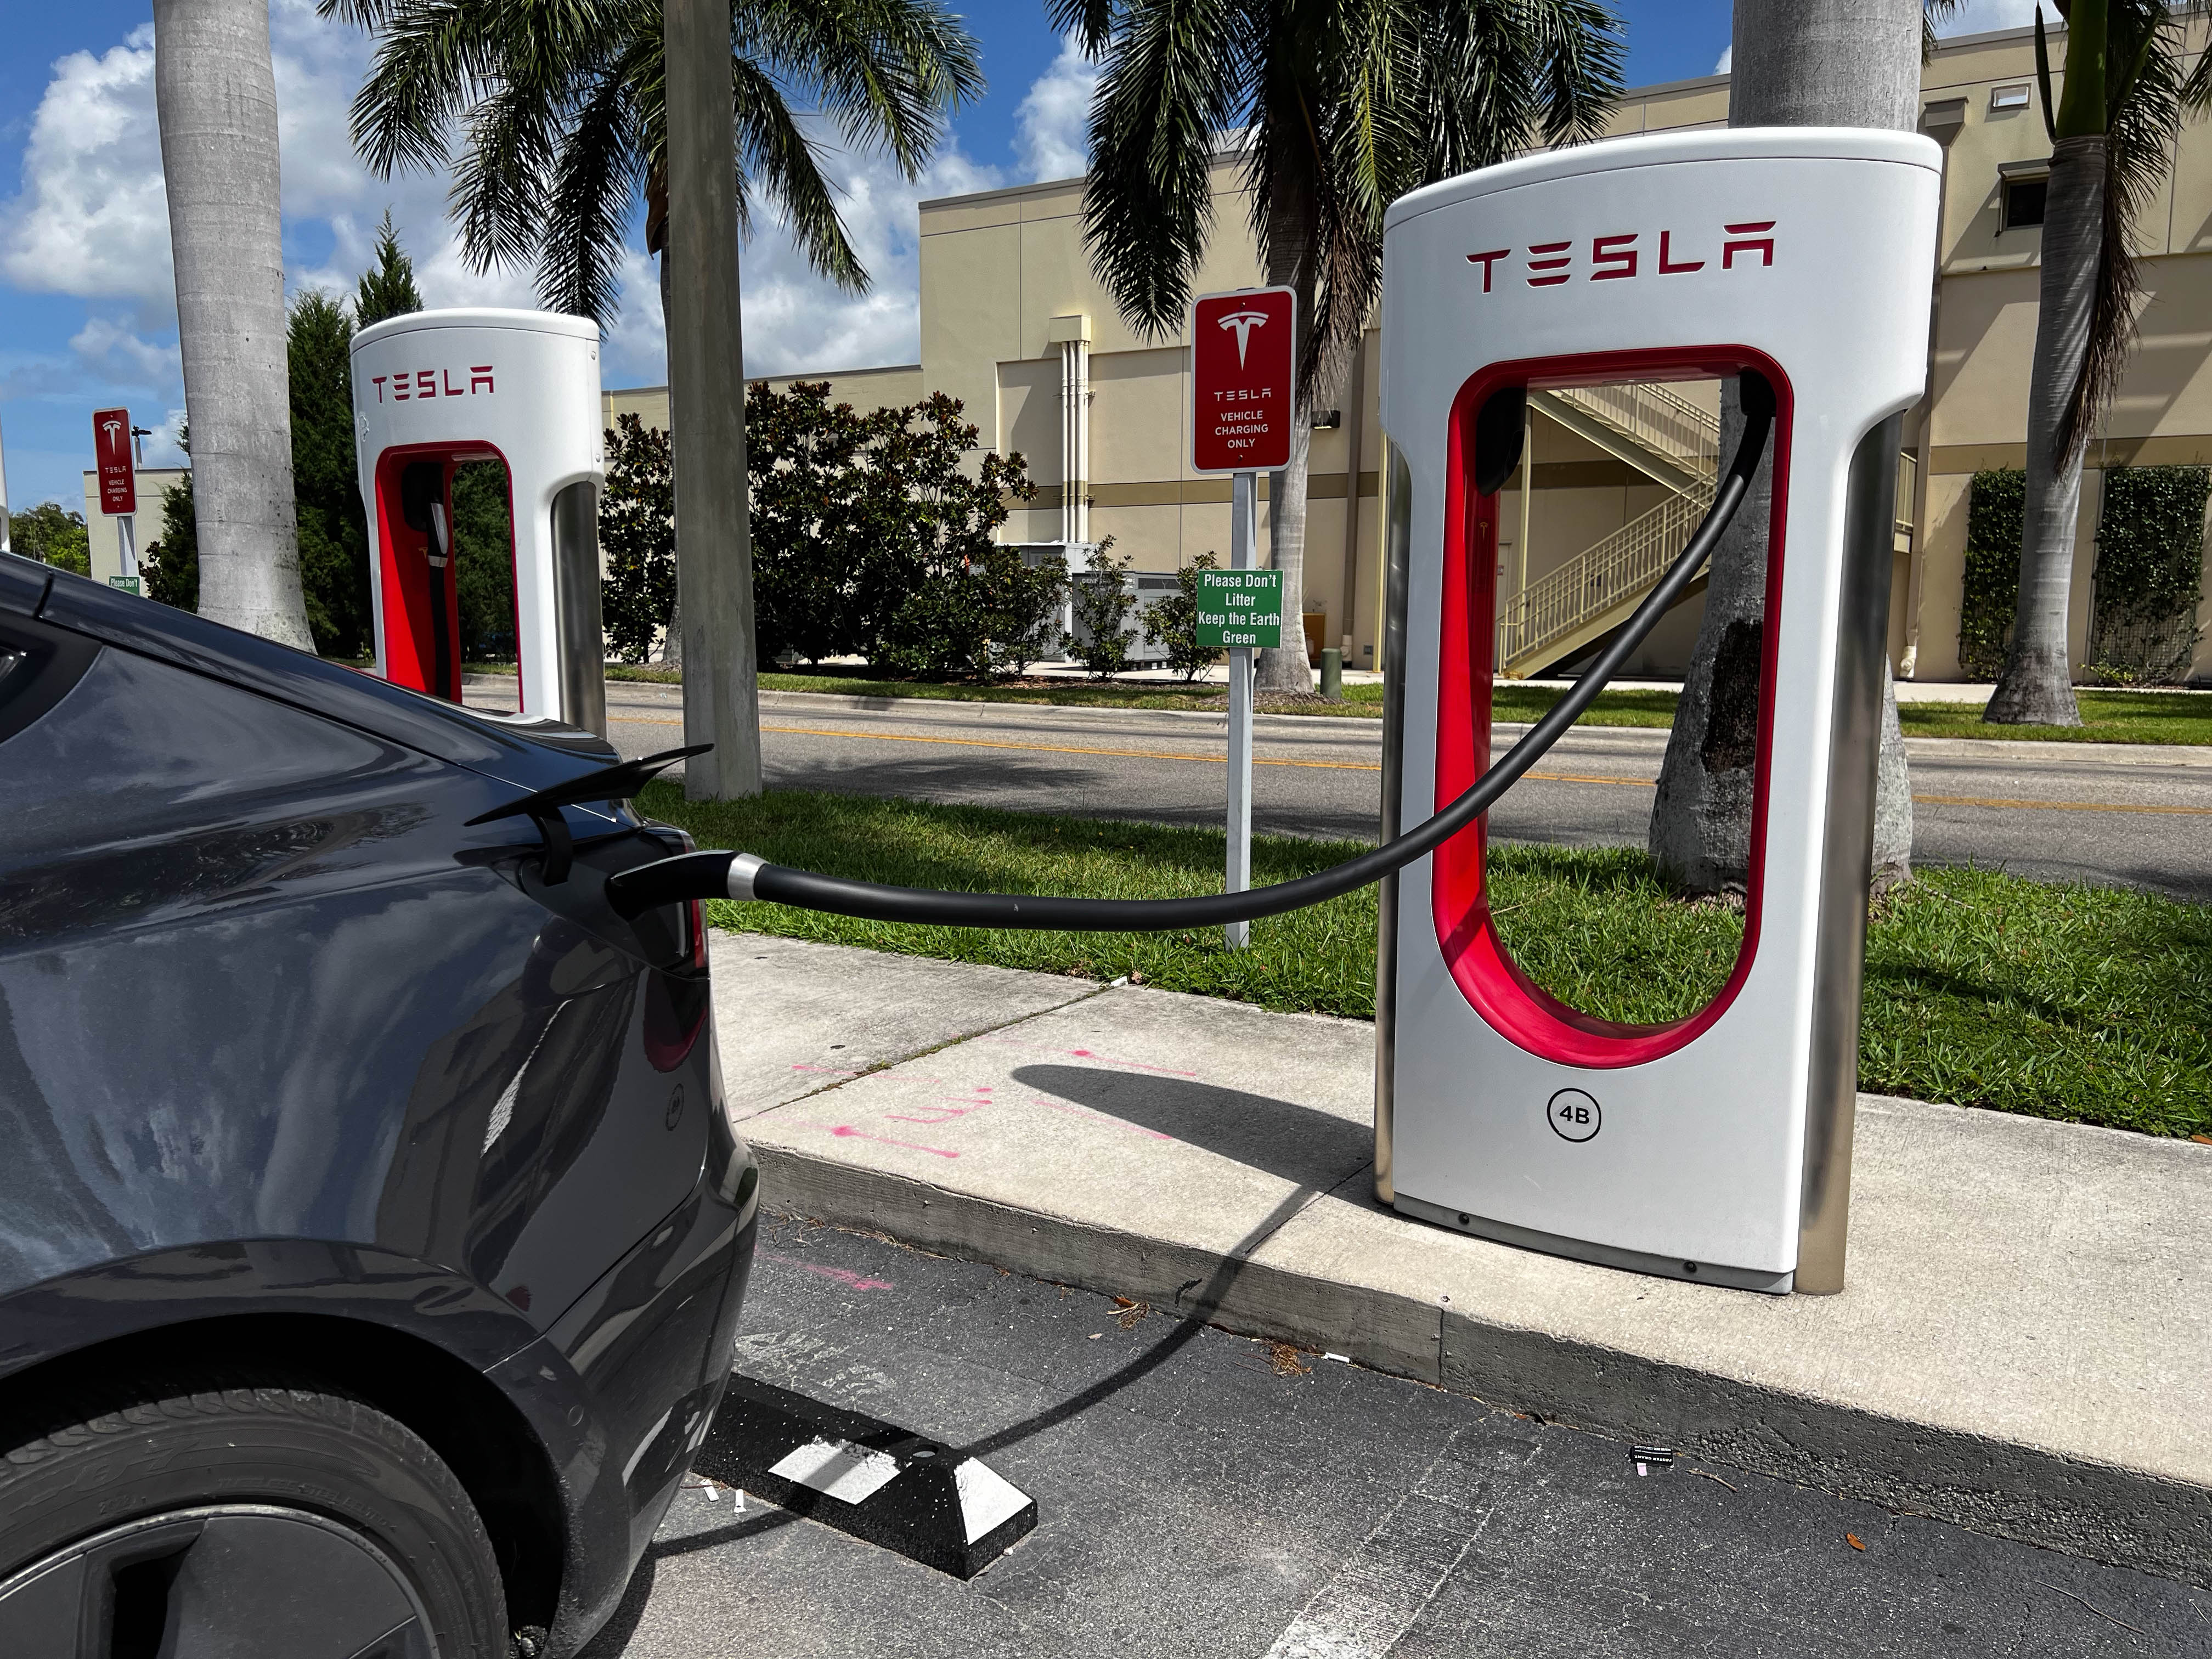 An electric car being charged at a Tesla Charging Station at the Sarasota Airport in Florida.